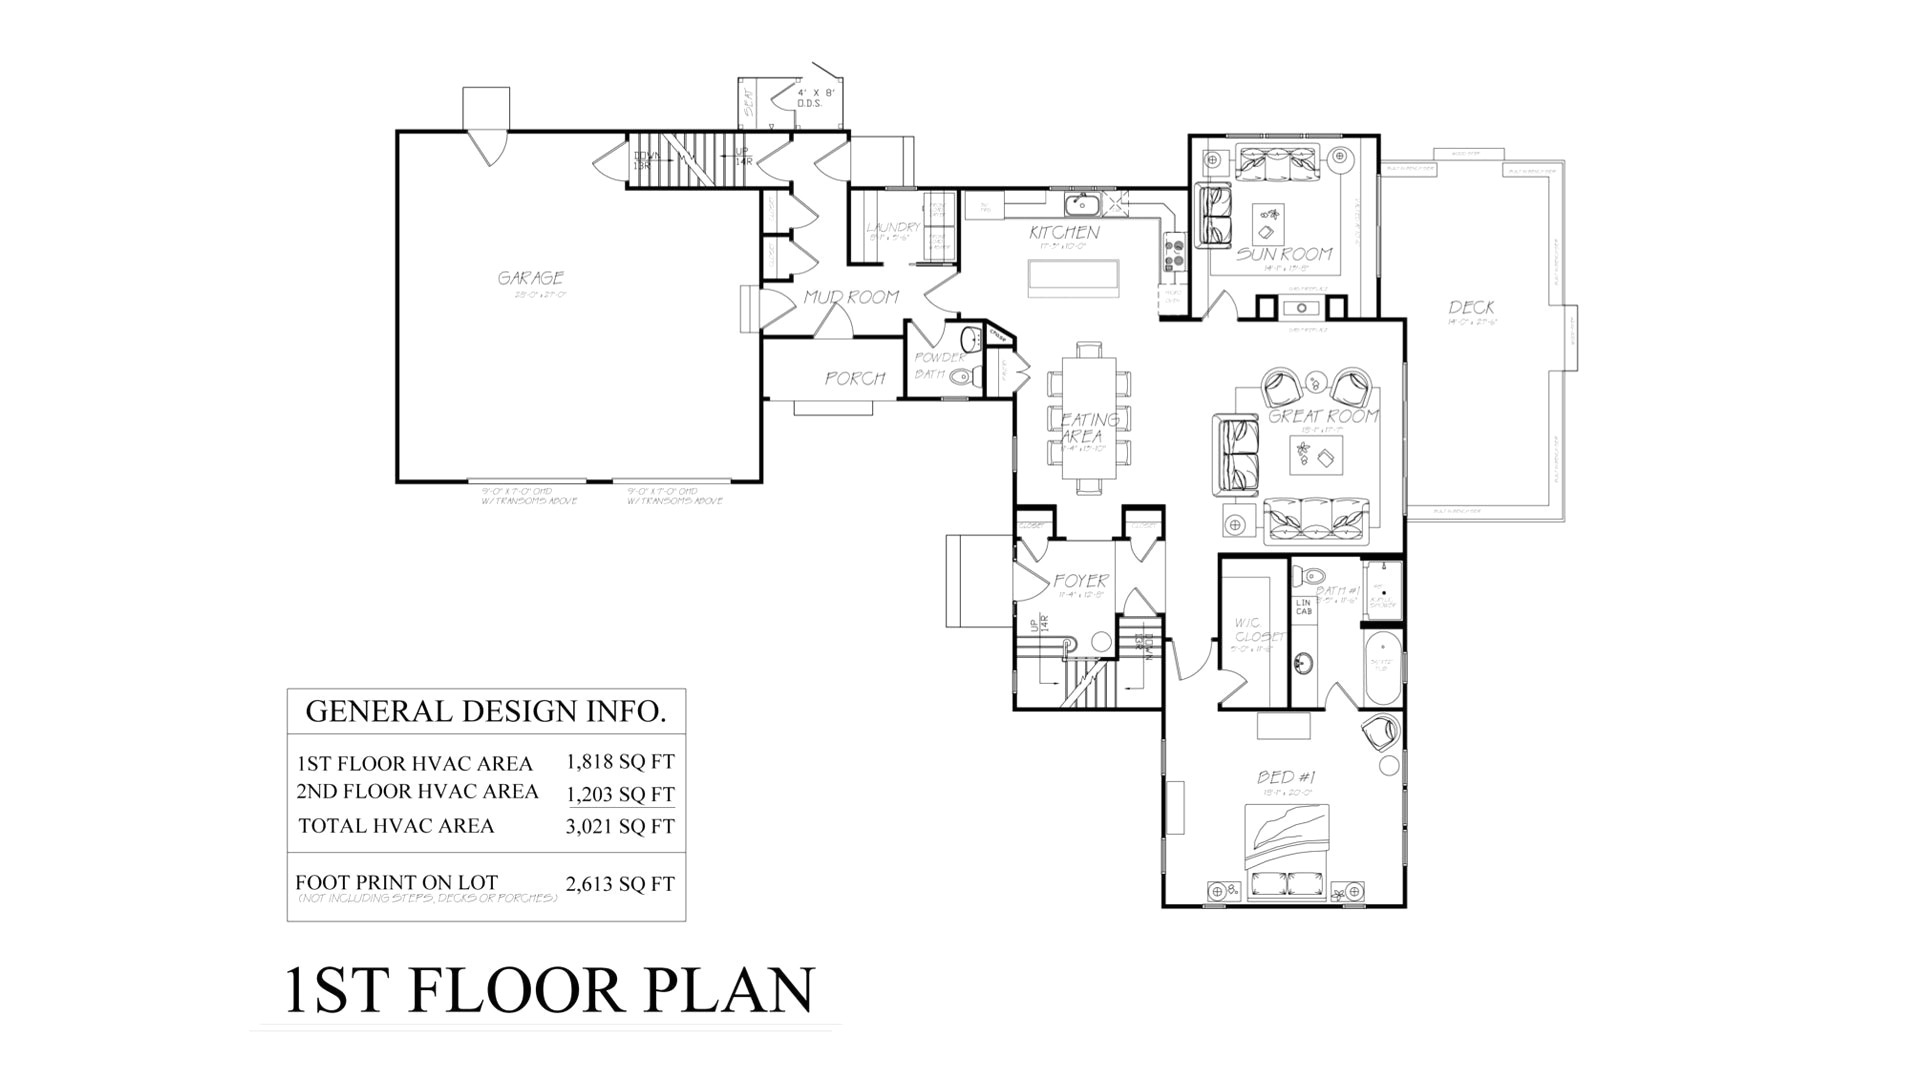 30a 50 house plans luxury 50 sqm house plan design luxury 30 50 house